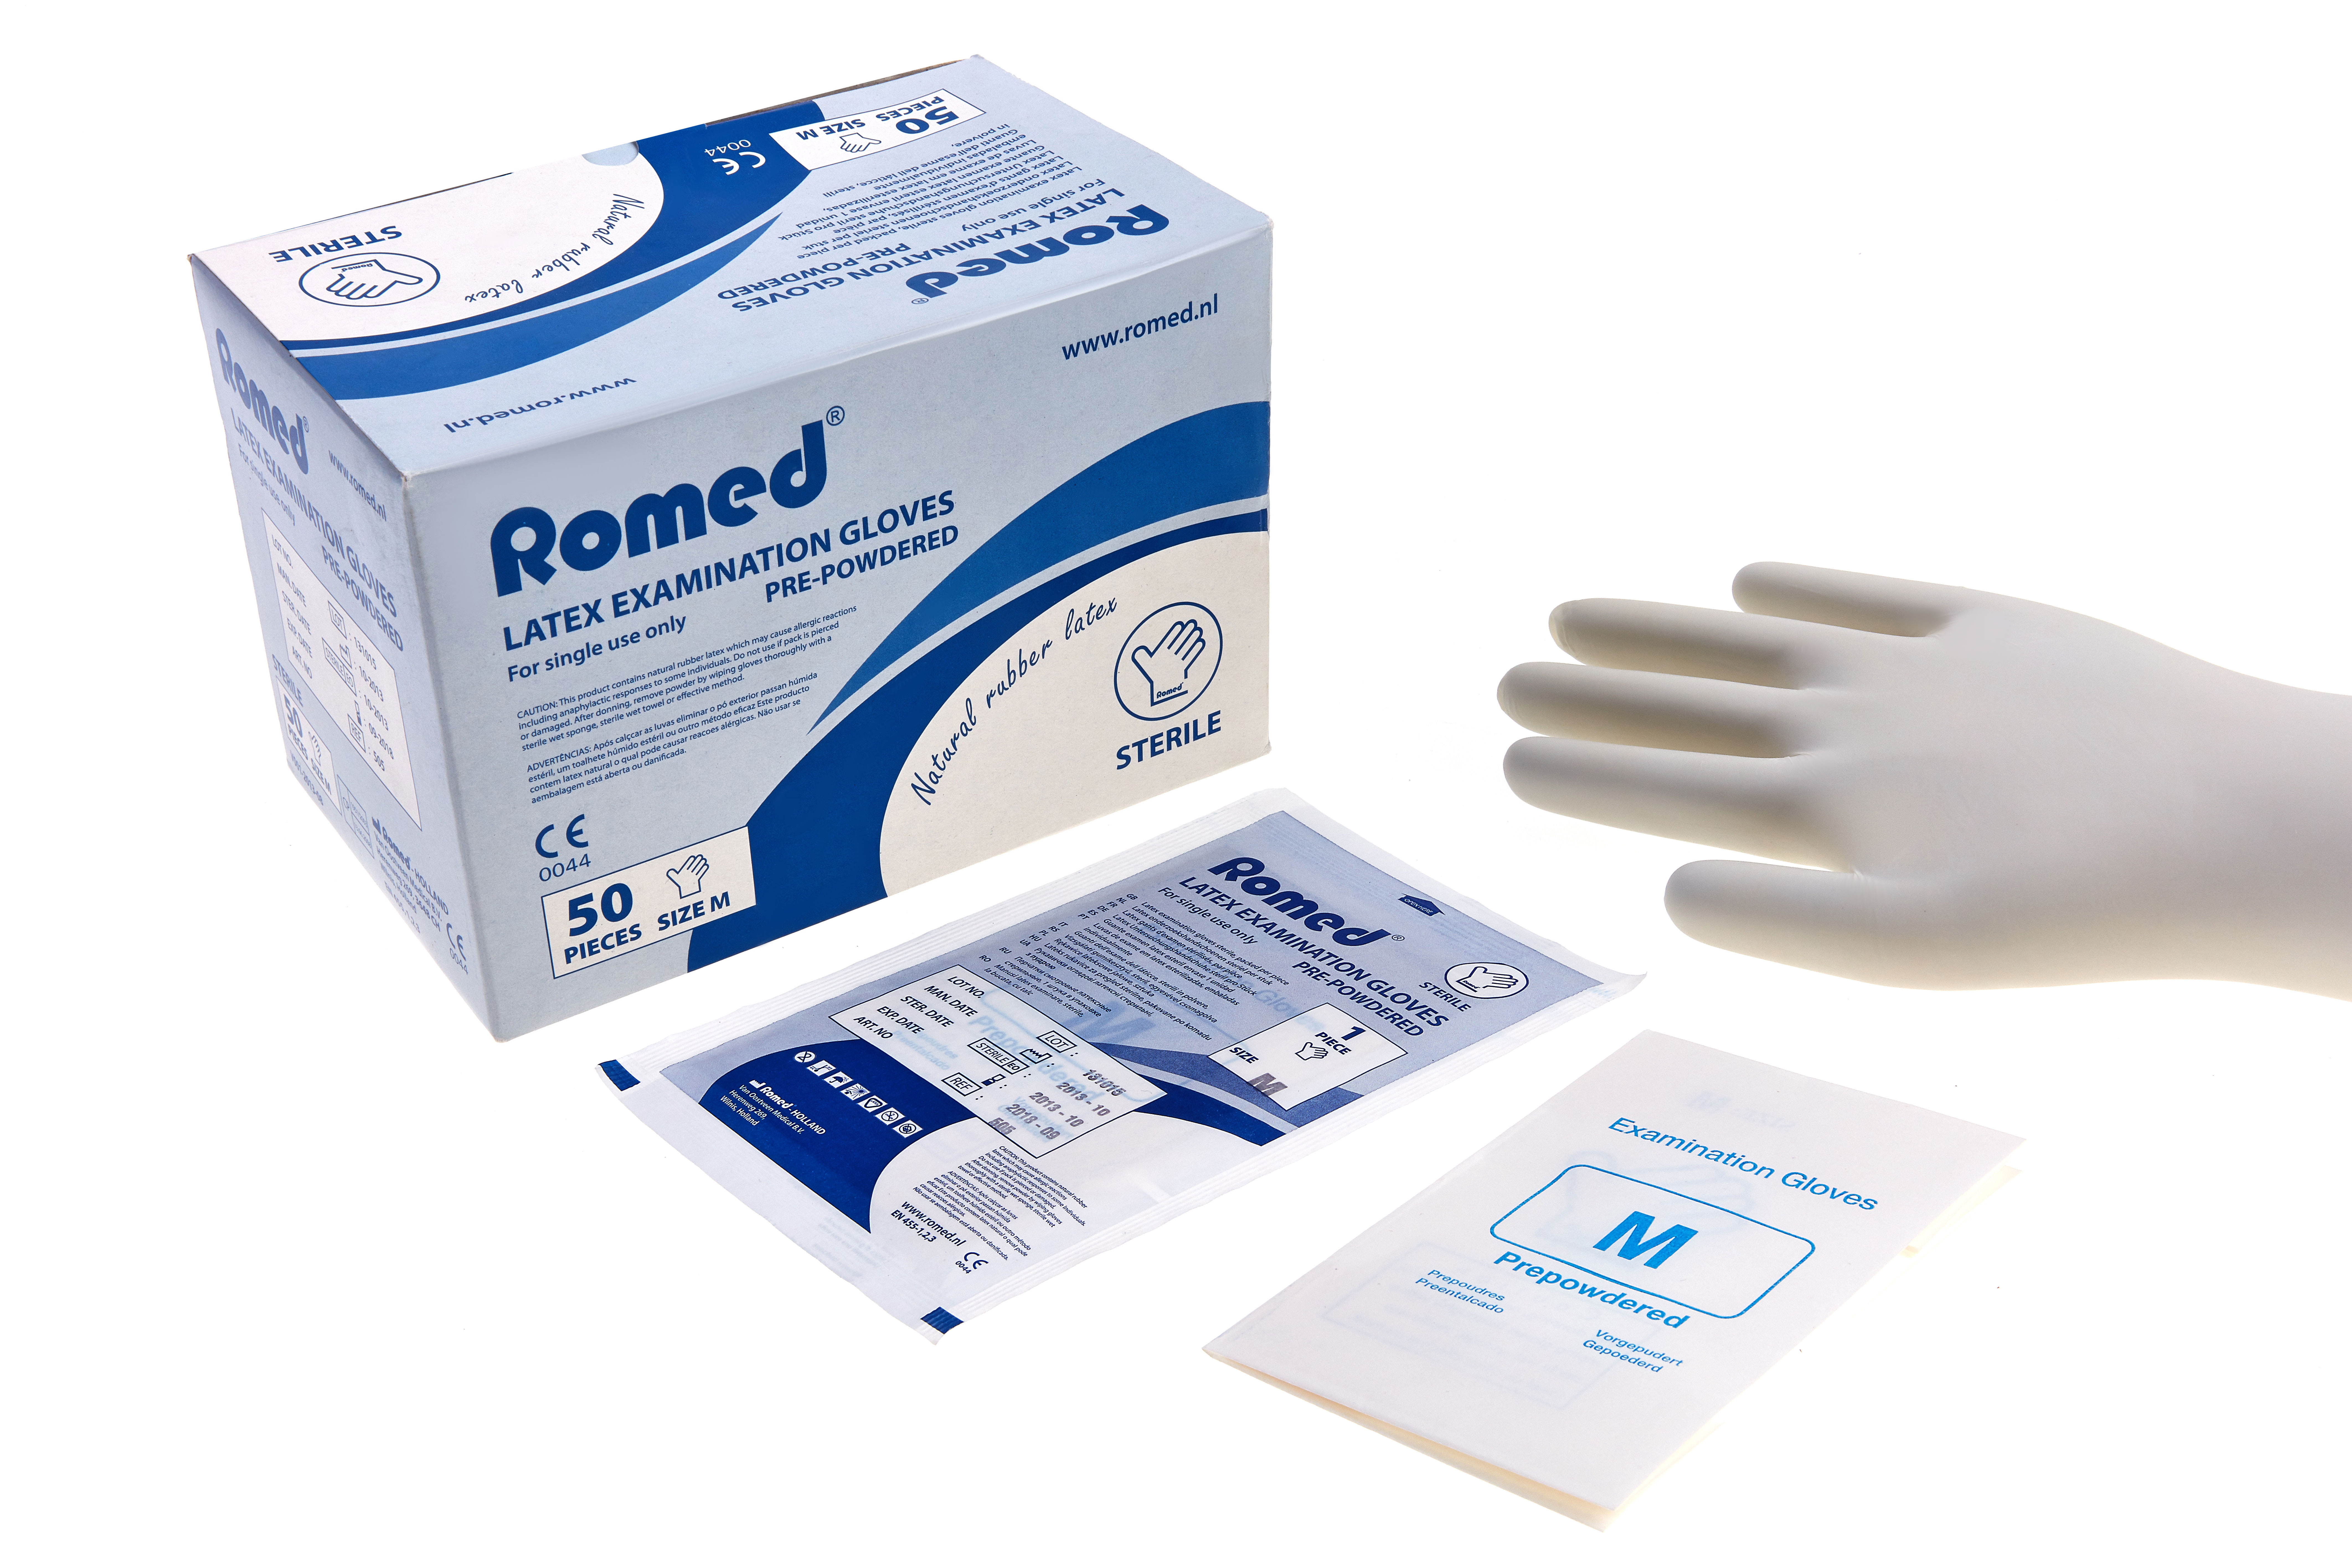 700 Romed latex examination gloves, sterile per pair,small, prepowdered, per 50 pairs in an inner box, 6 x 50 pairs = 300 pairs in a carton.